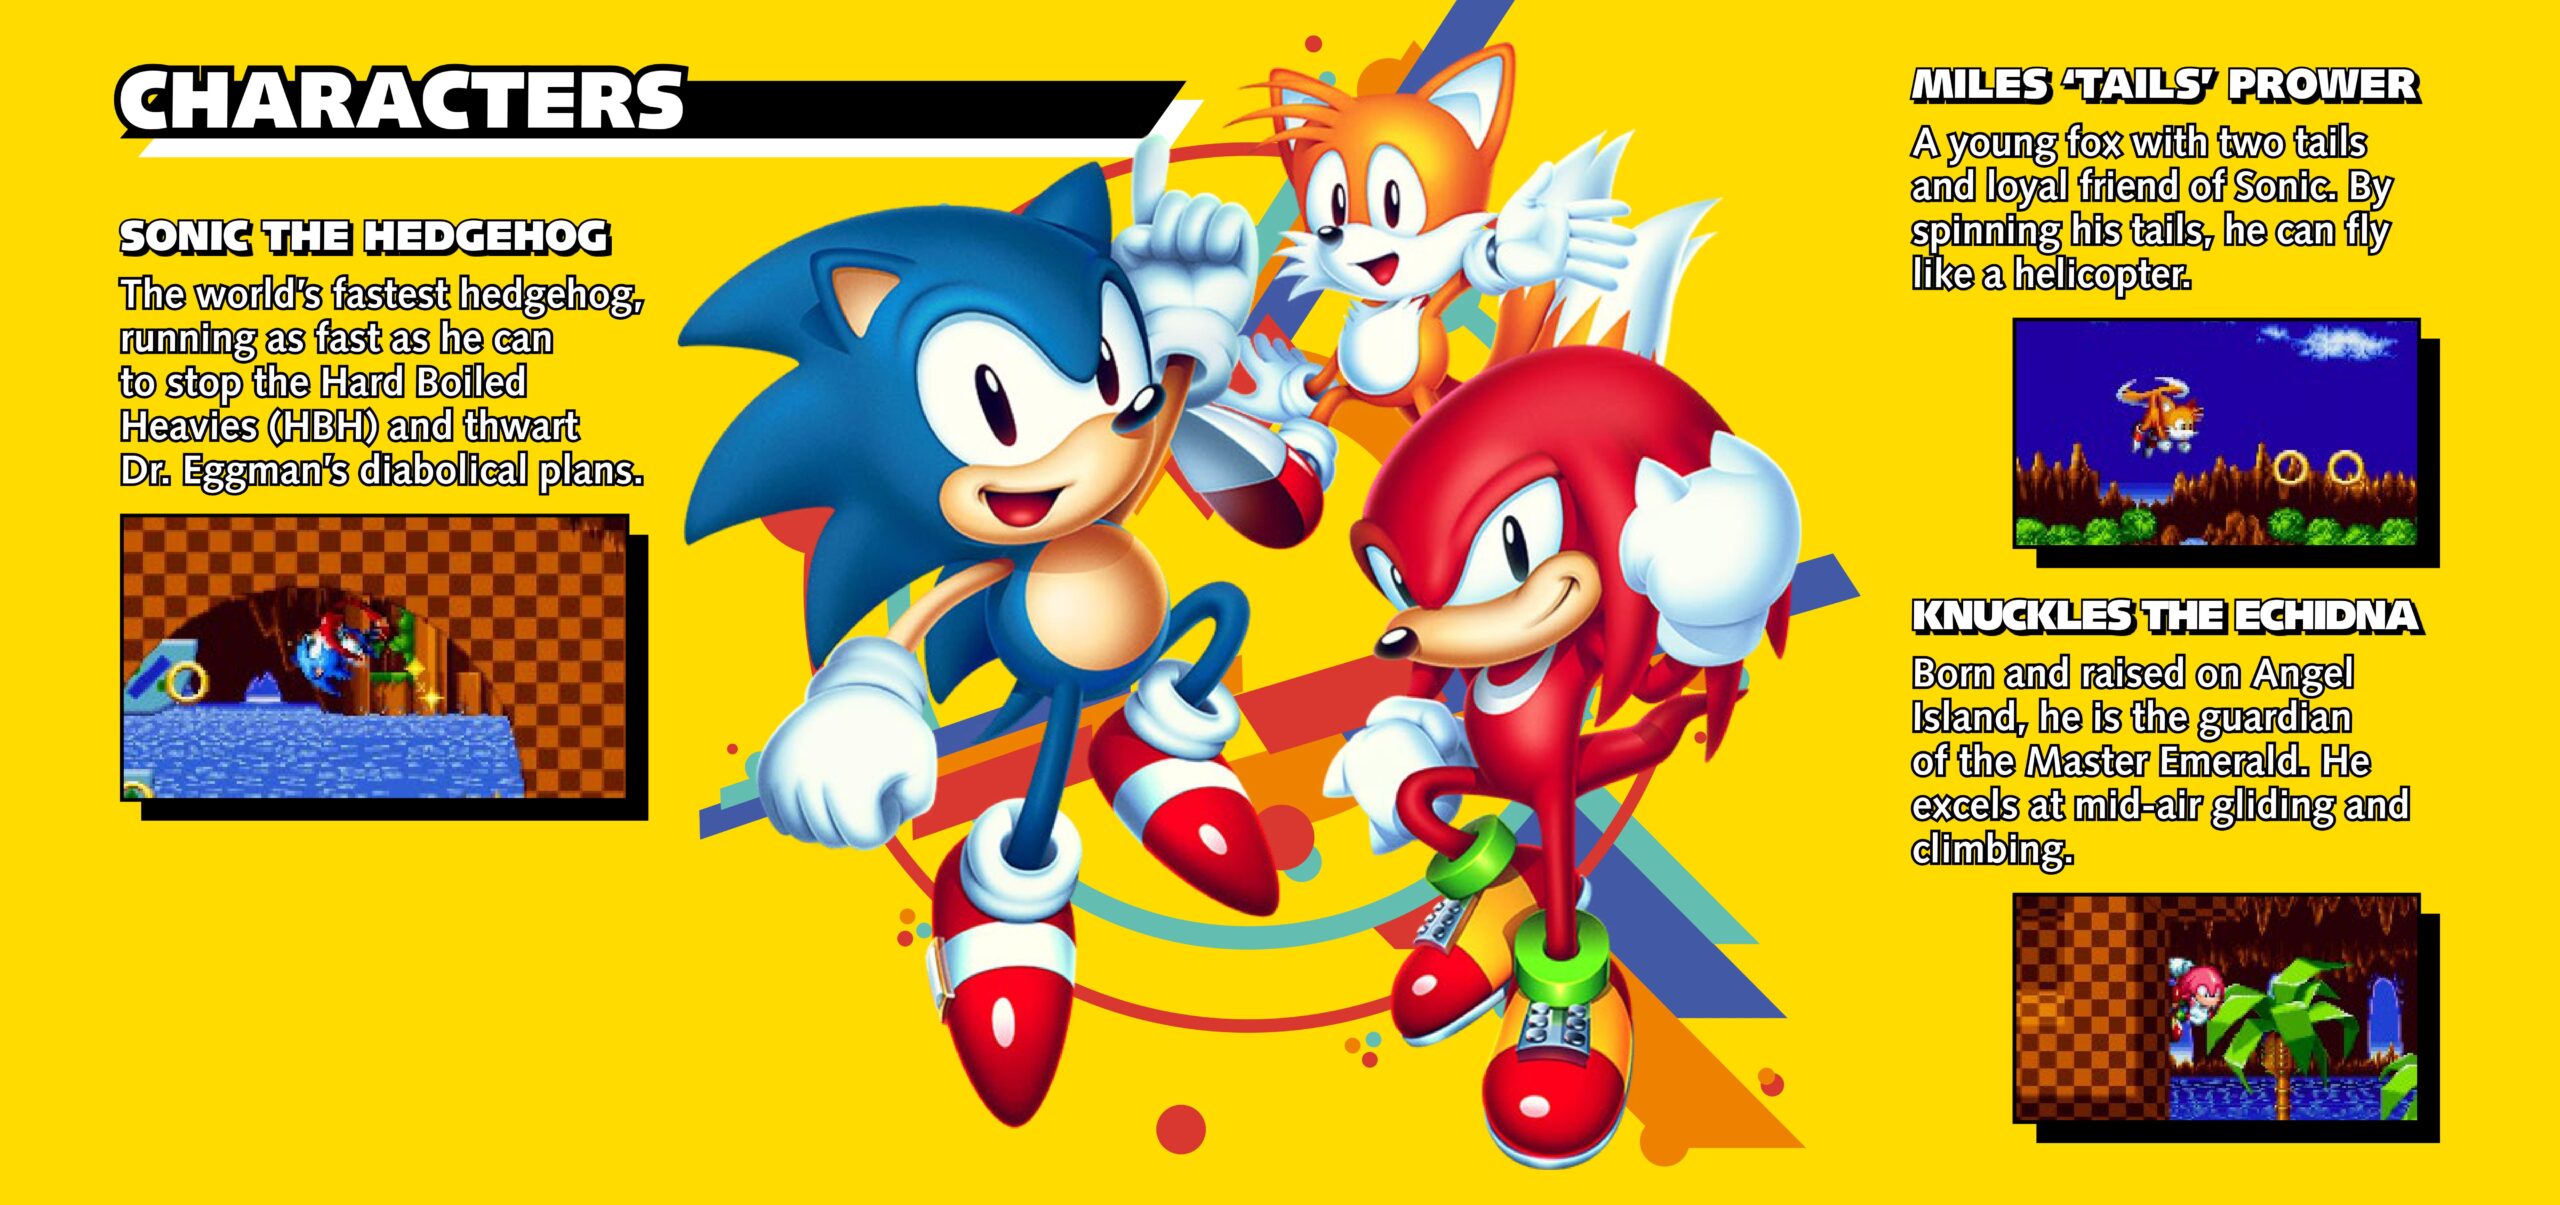 I have 2 copies of a 43 rated game on metacritic, so its 86. That's how it  works right? : r/SonicTheHedgehog